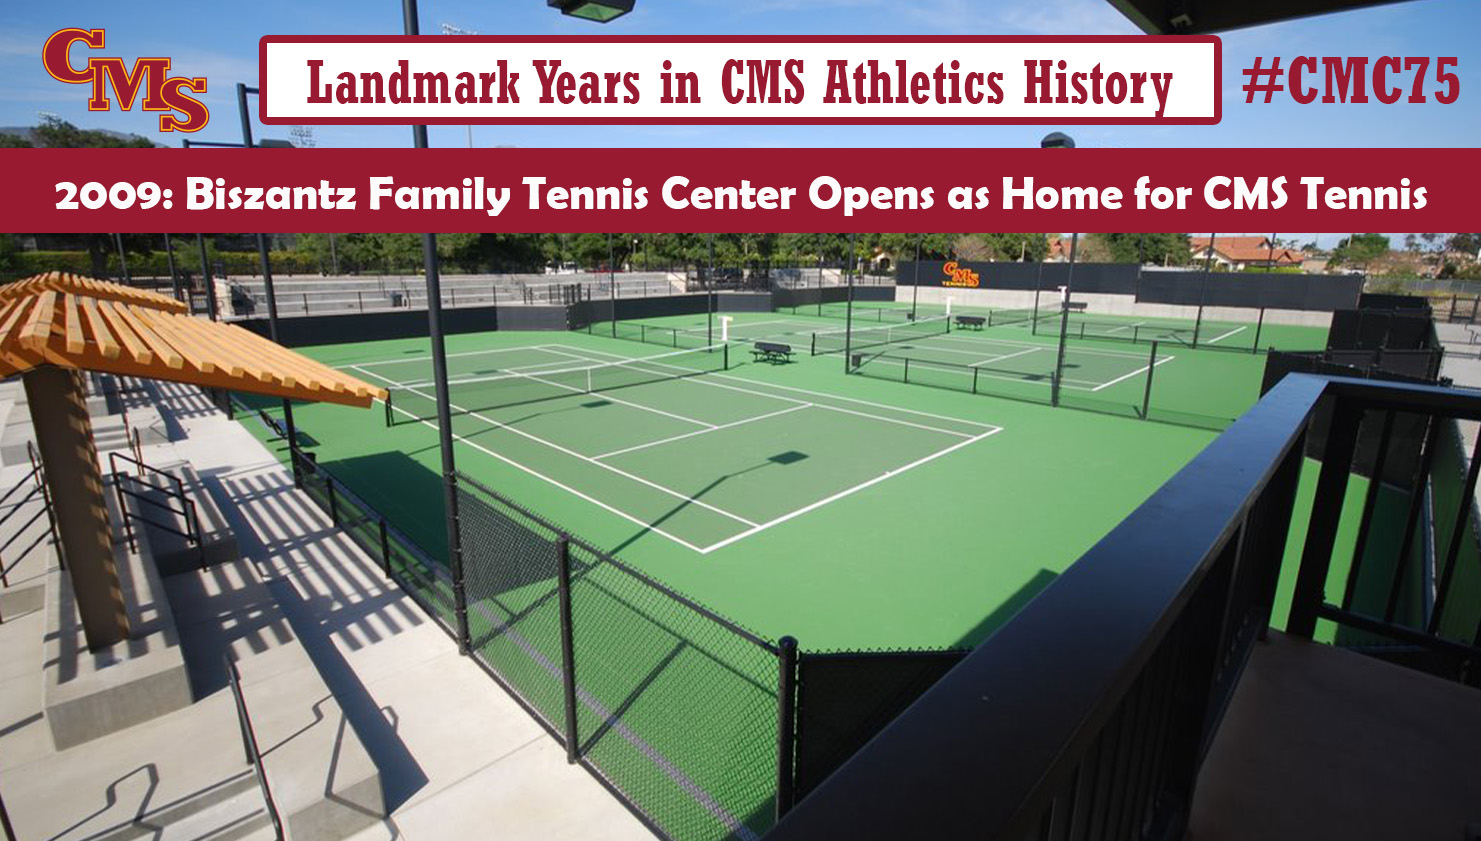 Picture of Biszantz Family Tennis Center. Words over the photo read: Landmark Years in CMS Athletics History: 2009: Biszantz Family Tennis Center Opens as Home for CMS Tennis